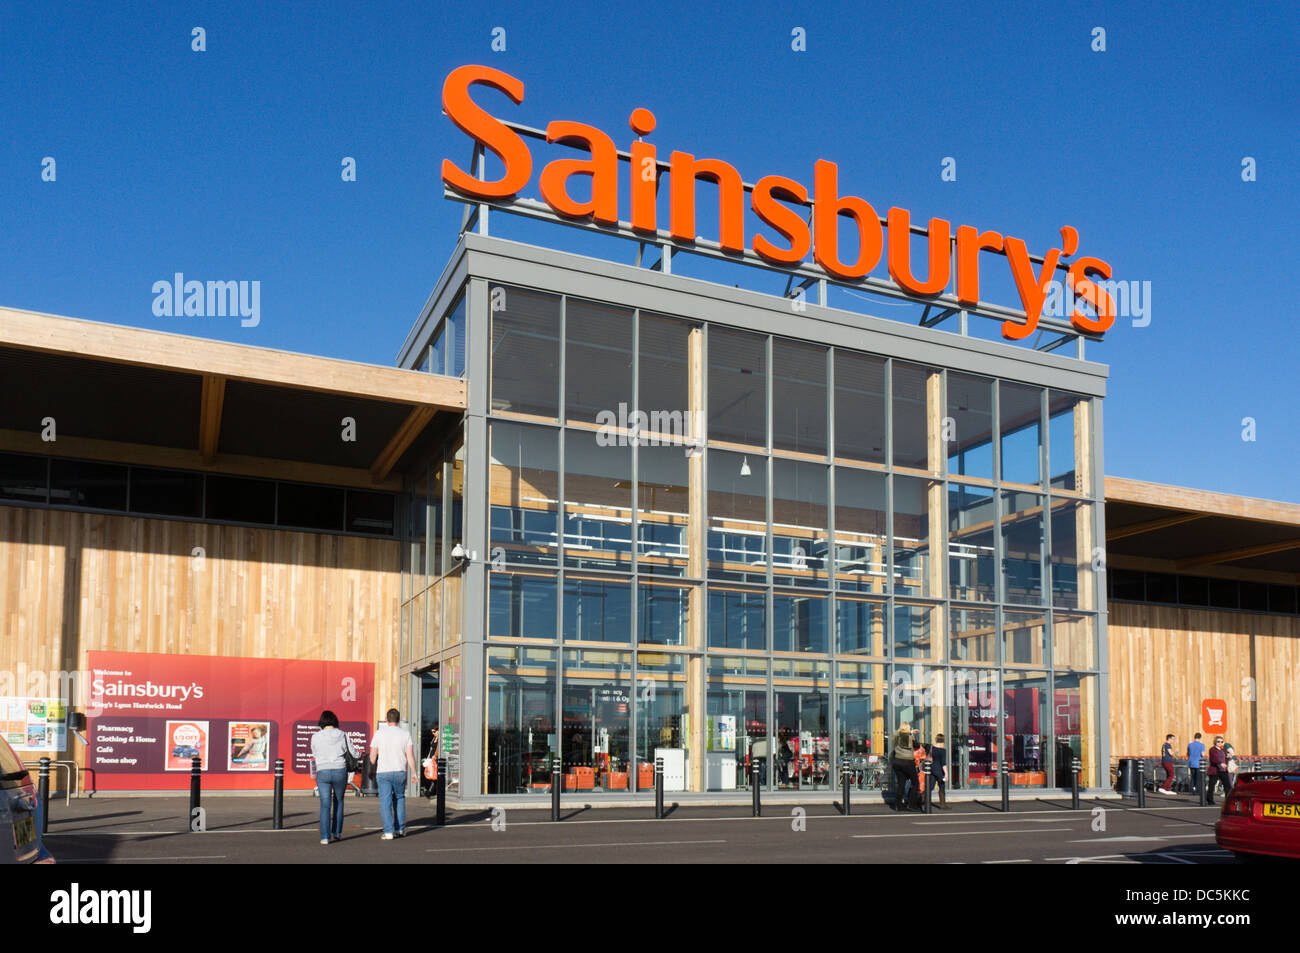 A large sign over the entrance to the Sainsbury's supermarket at Hardwick Road, King's Lynn. Stock Photo